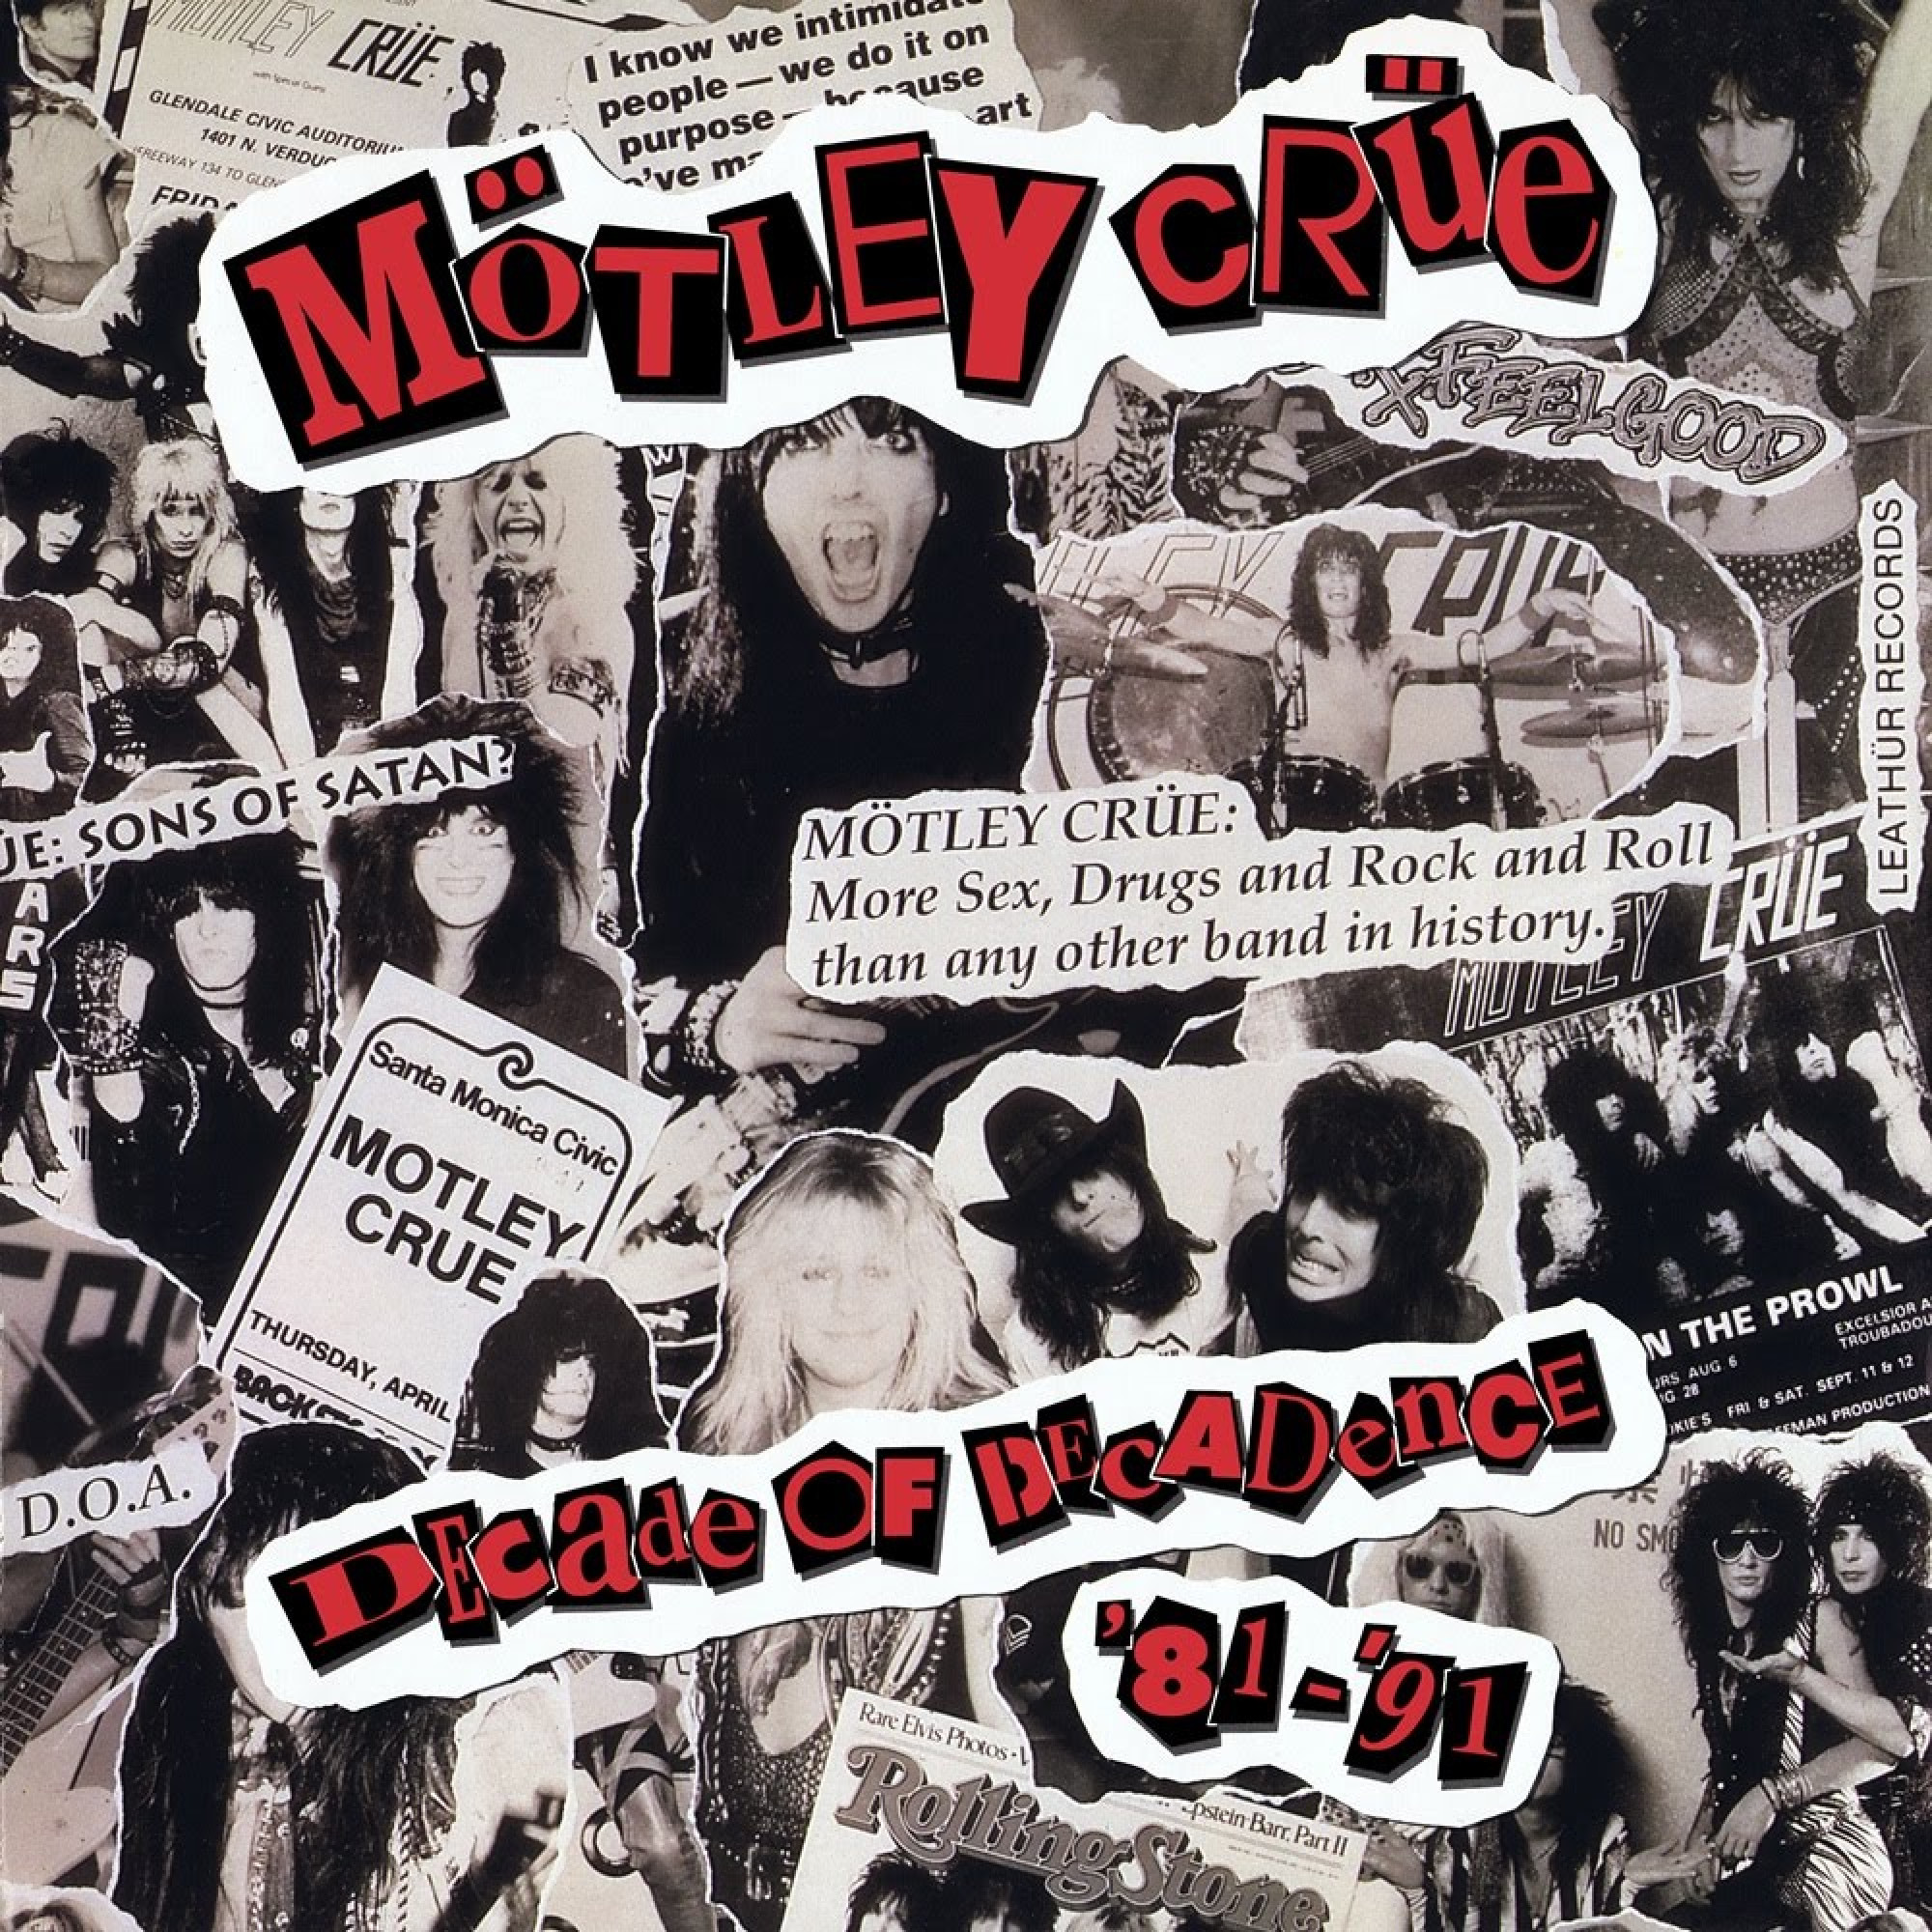 MOTLEY CRUE Looks That Kill/Piece Of Your Action/Live Wire 12”